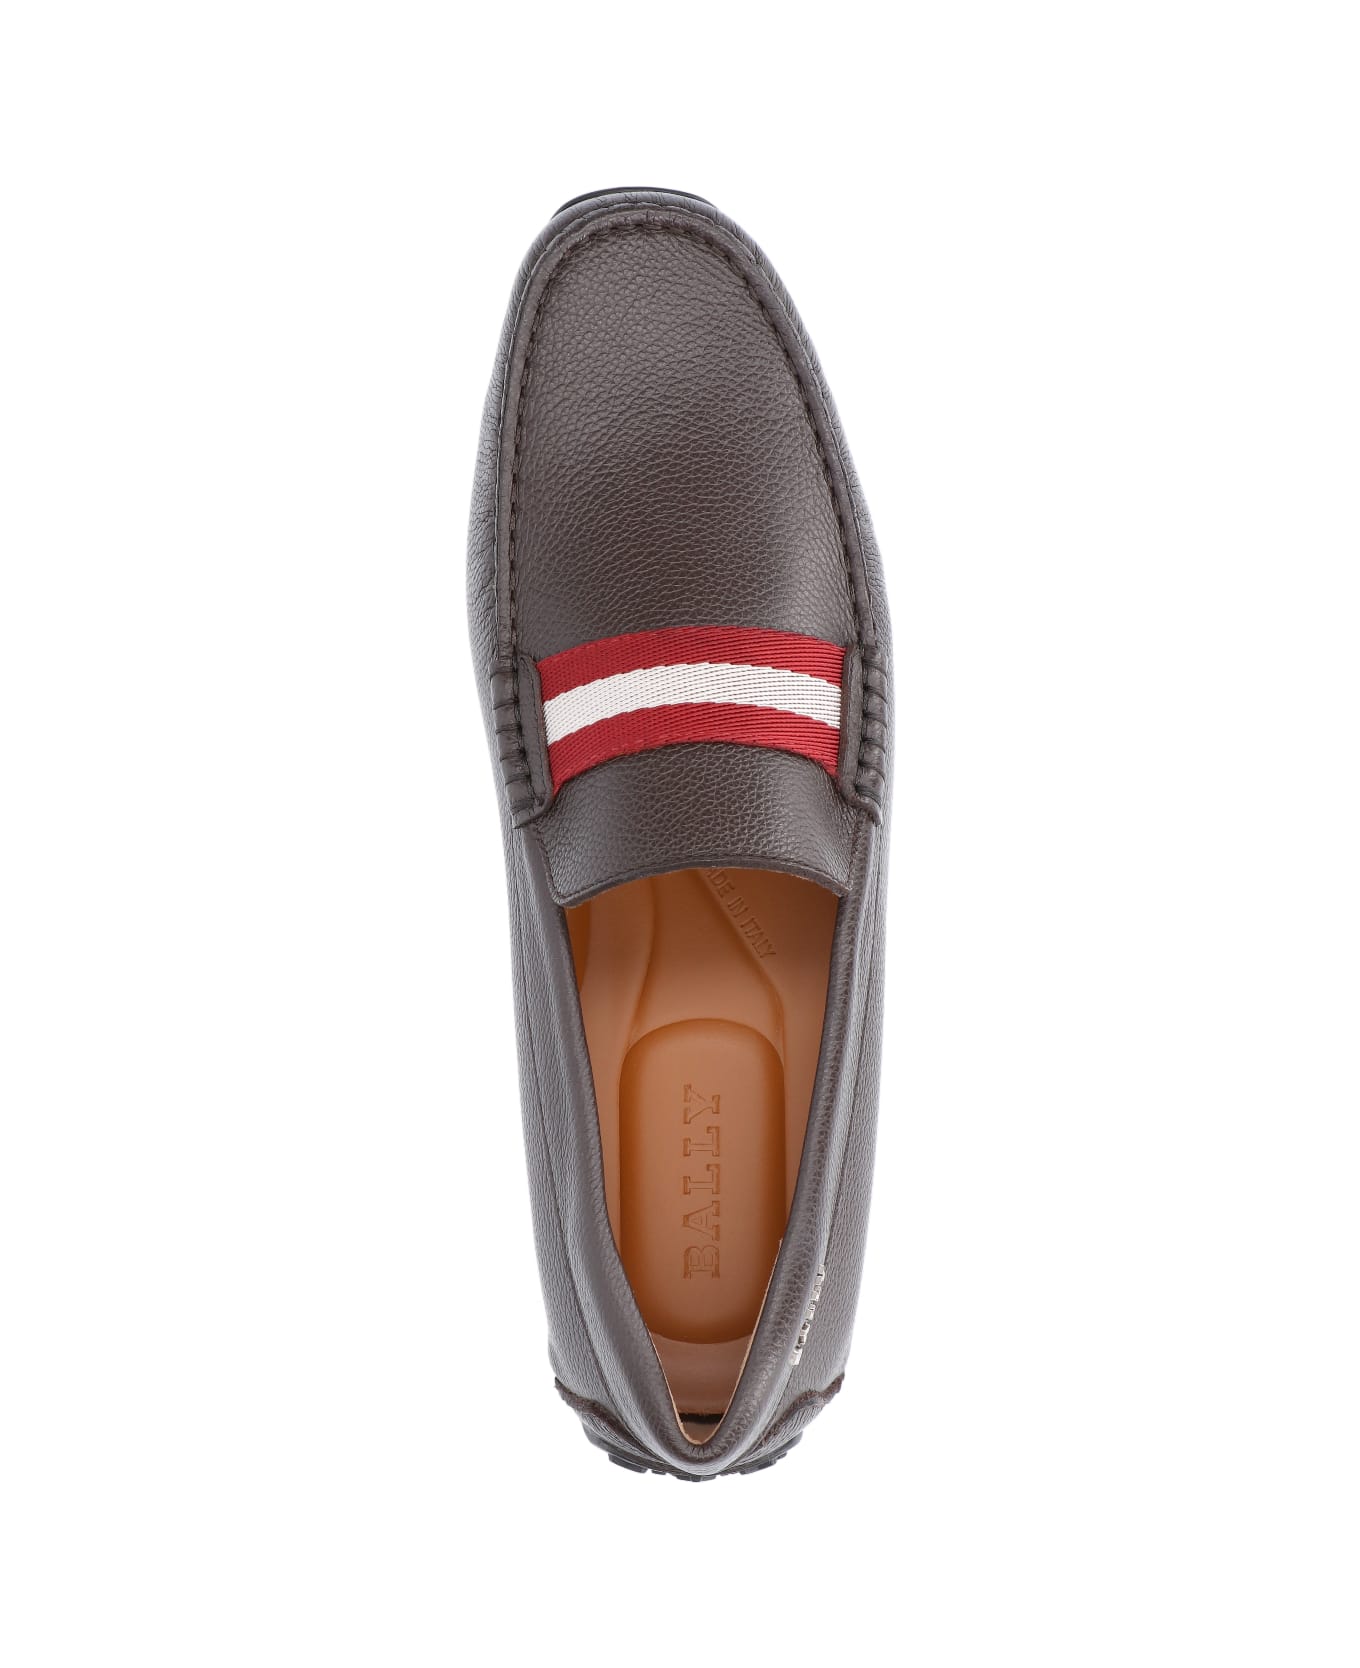 Bally Loafers "pearce" - Brown